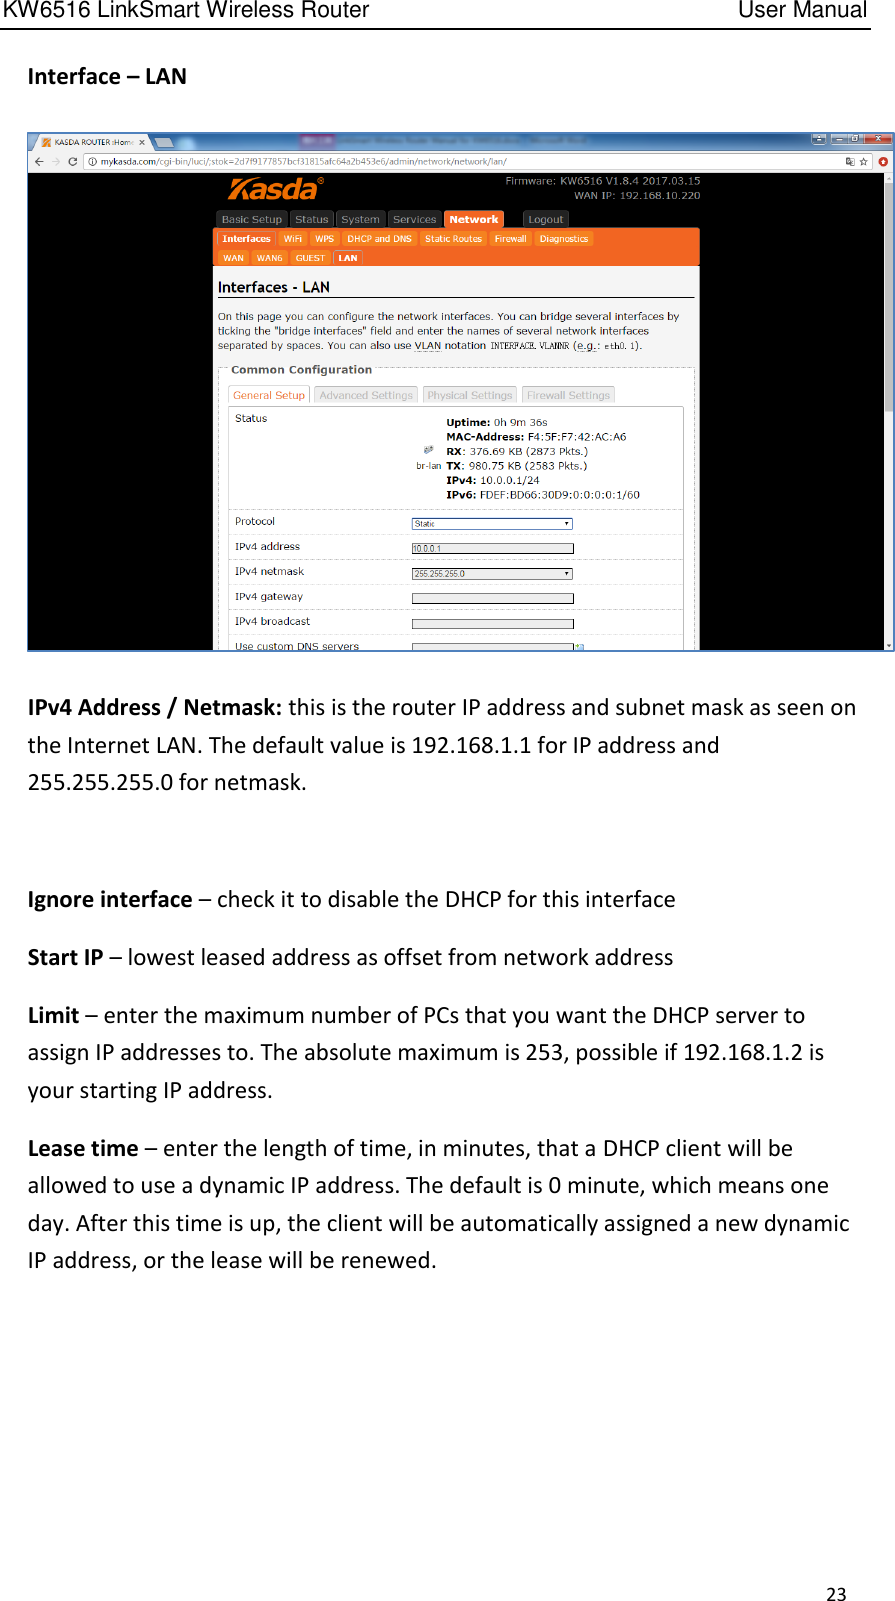 KW6516 LinkSmart Wireless Router         User Manual 23   Interface – LAN    IPv4 Address / Netmask: this is the router IP address and subnet mask as seen on the Internet LAN. The default value is 192.168.1.1 for IP address and 255.255.255.0 for netmask.      Ignore interface – check it to disable the DHCP for this interface   Start IP – lowest leased address as offset from network address   Limit – enter the maximum number of PCs that you want the DHCP server to assign IP addresses to. The absolute maximum is 253, possible if 192.168.1.2 is your starting IP address.   Lease time – enter the length of time, in minutes, that a DHCP client will be allowed to use a dynamic IP address. The default is 0 minute, which means one day. After this time is up, the client will be automatically assigned a new dynamic IP address, or the lease will be renewed.     